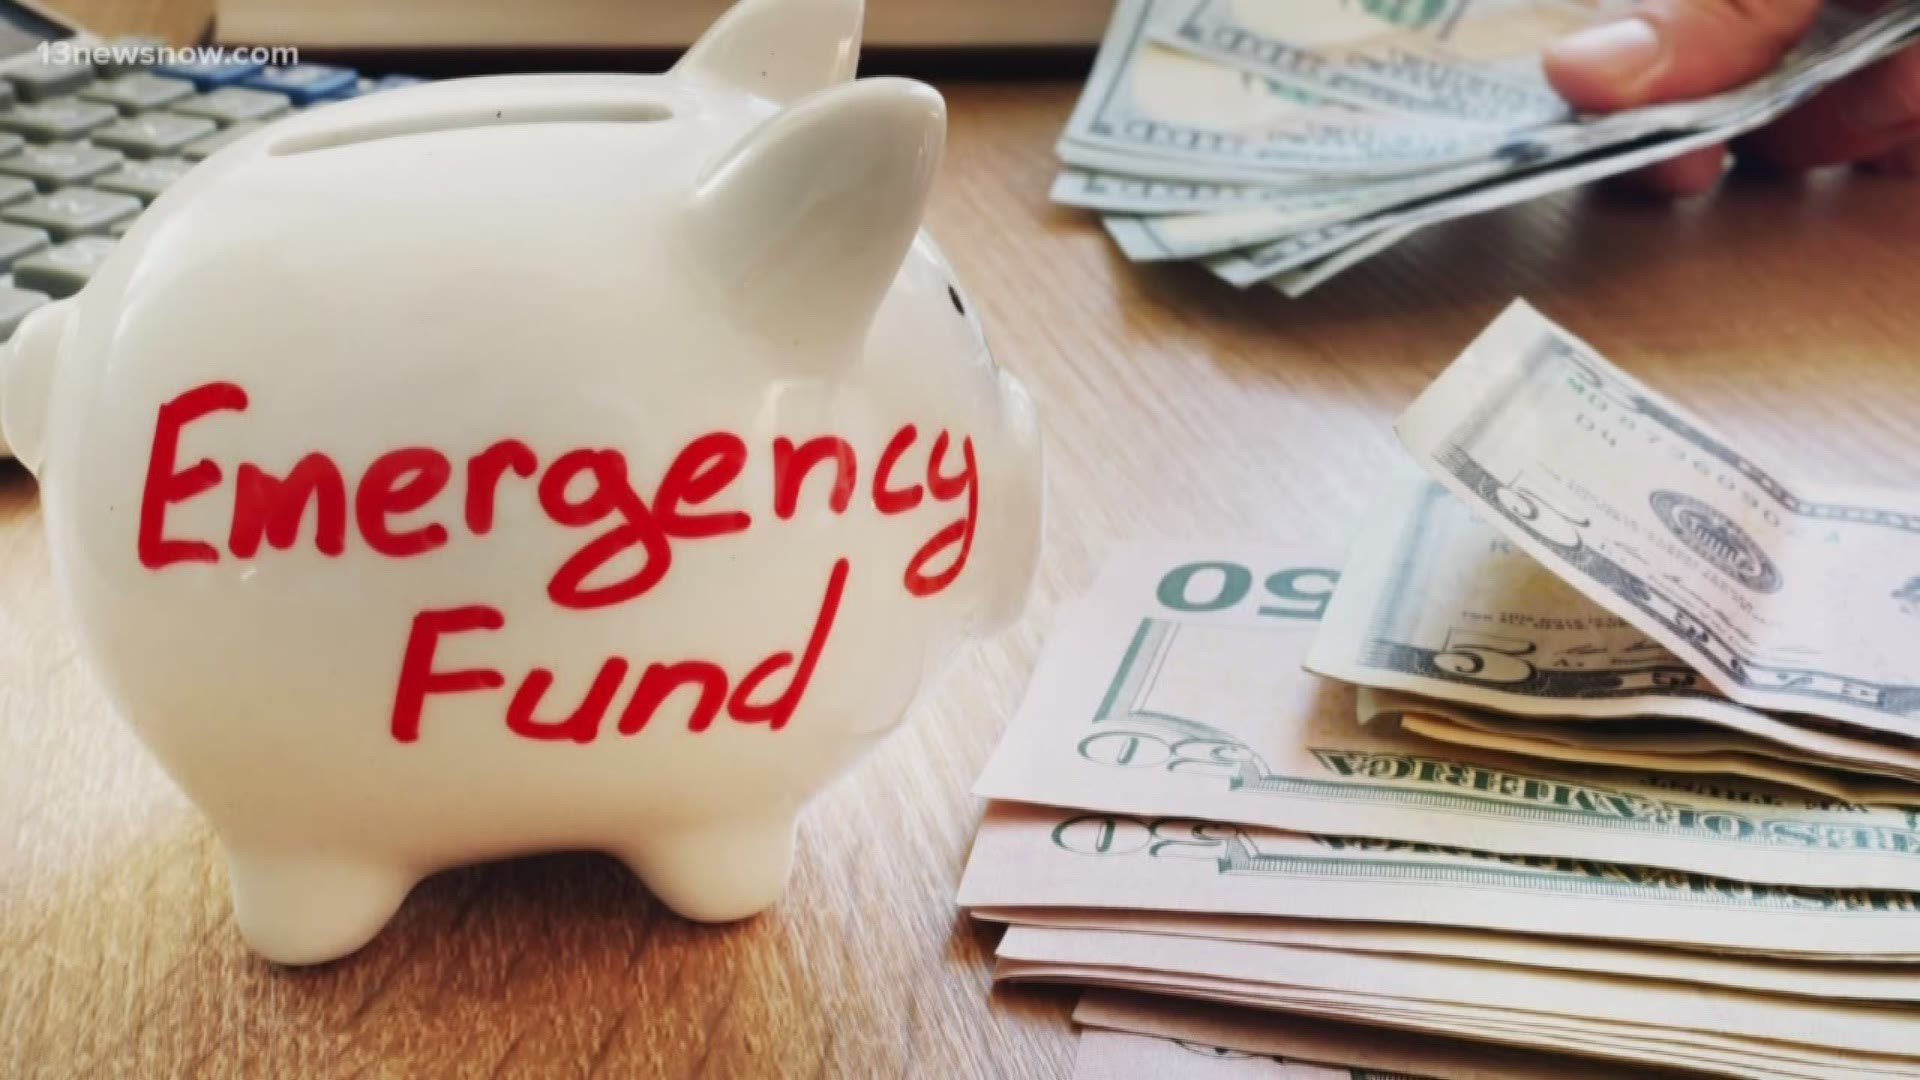 Financial experts recommend starting saving an emergency fund in case of a recession and to start paying off credit card debt. They also recommend holding off on big purchases.